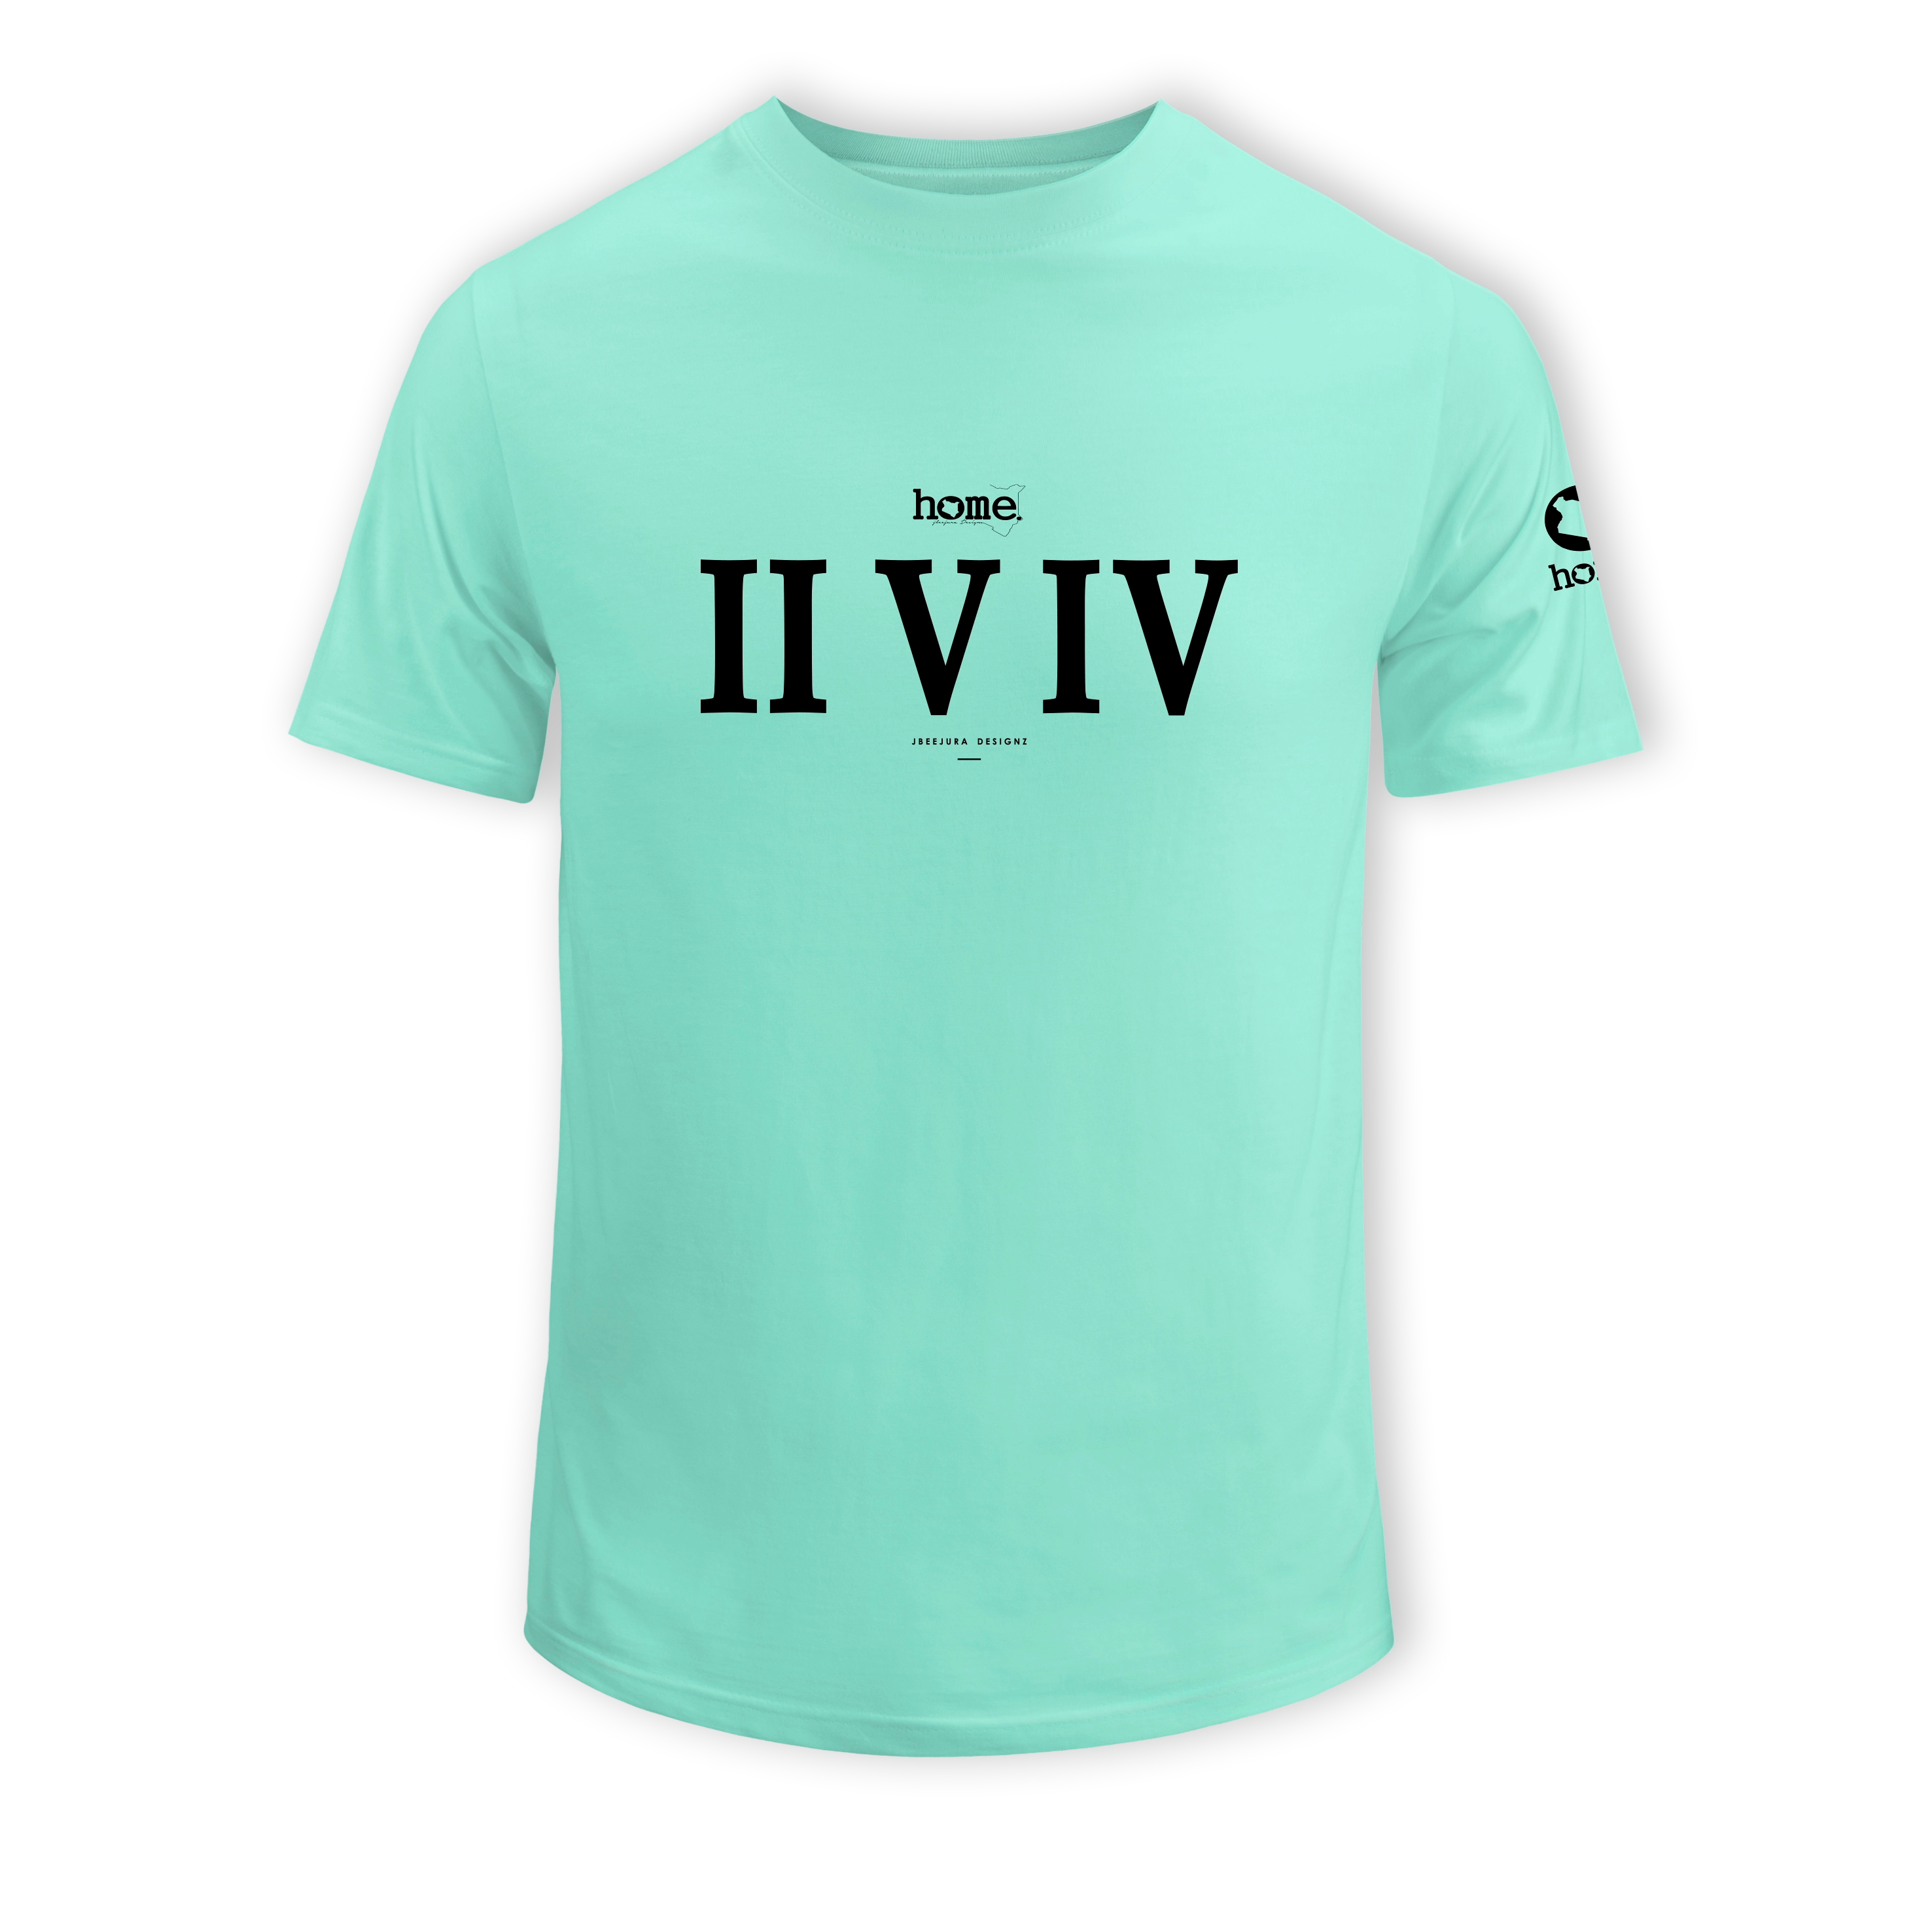 home_254 SHORT-SLEEVED TURQUOISE GREEN T-SHIRT WITH A BLACK ROMAN NUMERALS PRINT – COTTON PLUS FABRIC